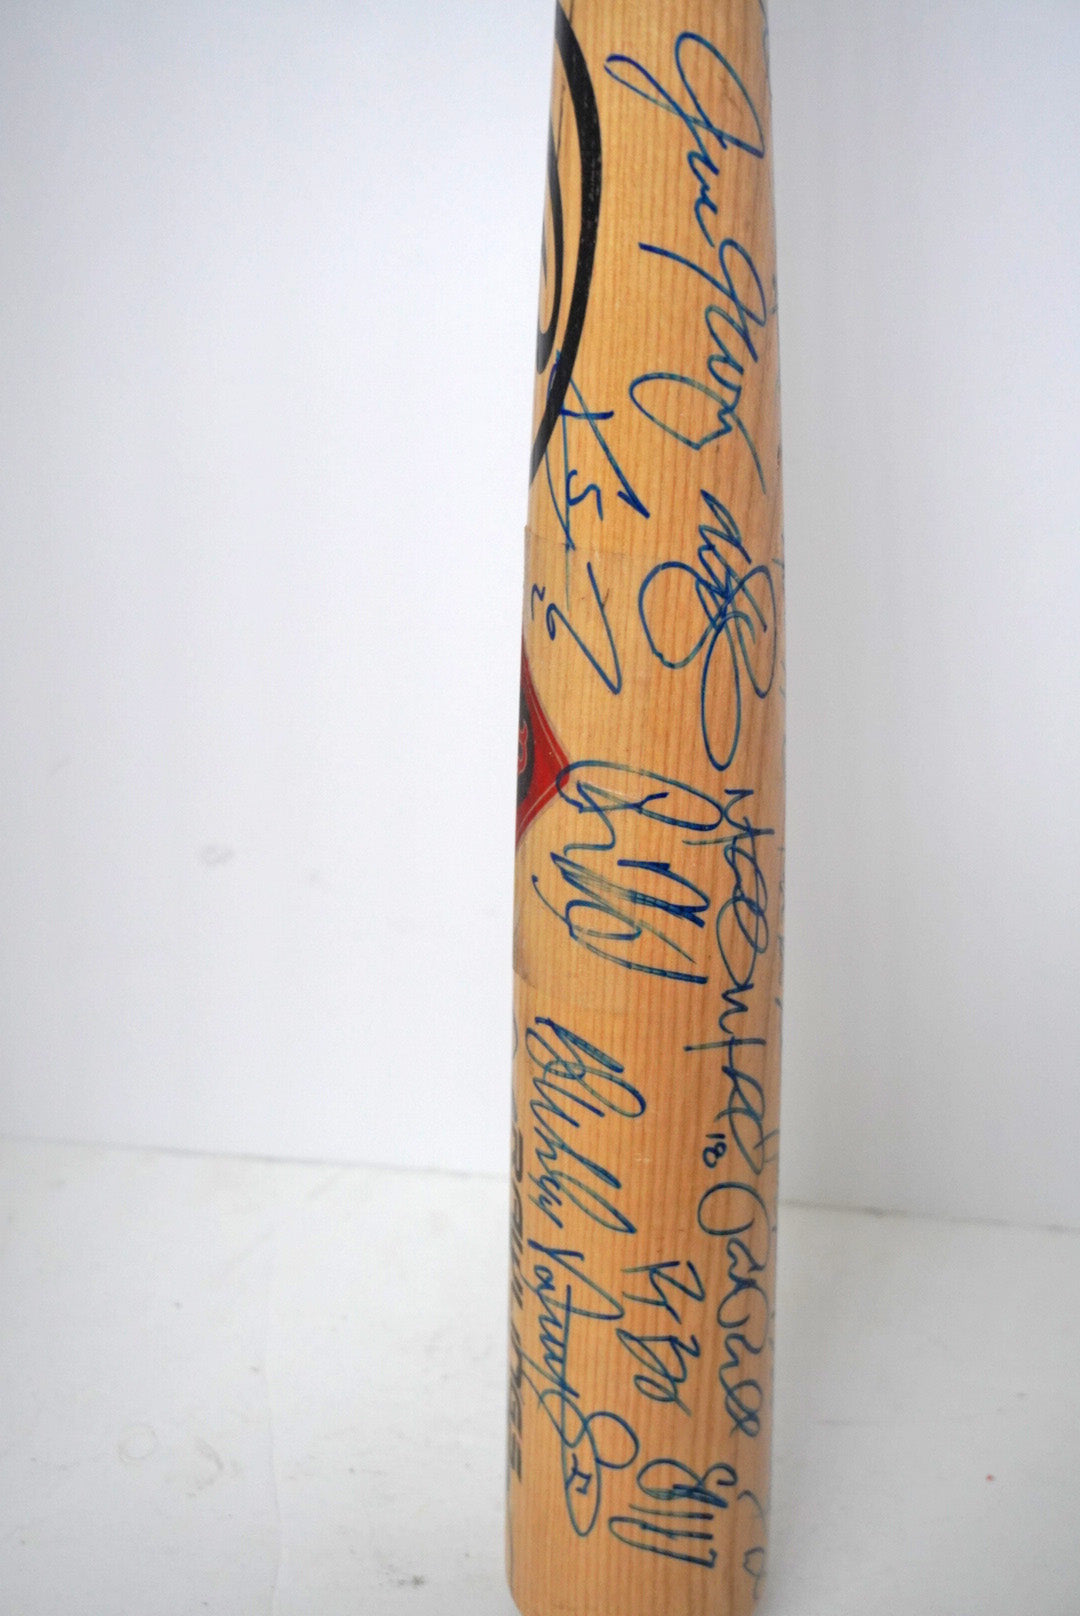 Mookie Betts, Xander Bogaerts, Boston Red Sox World Champions team signed bat with proof